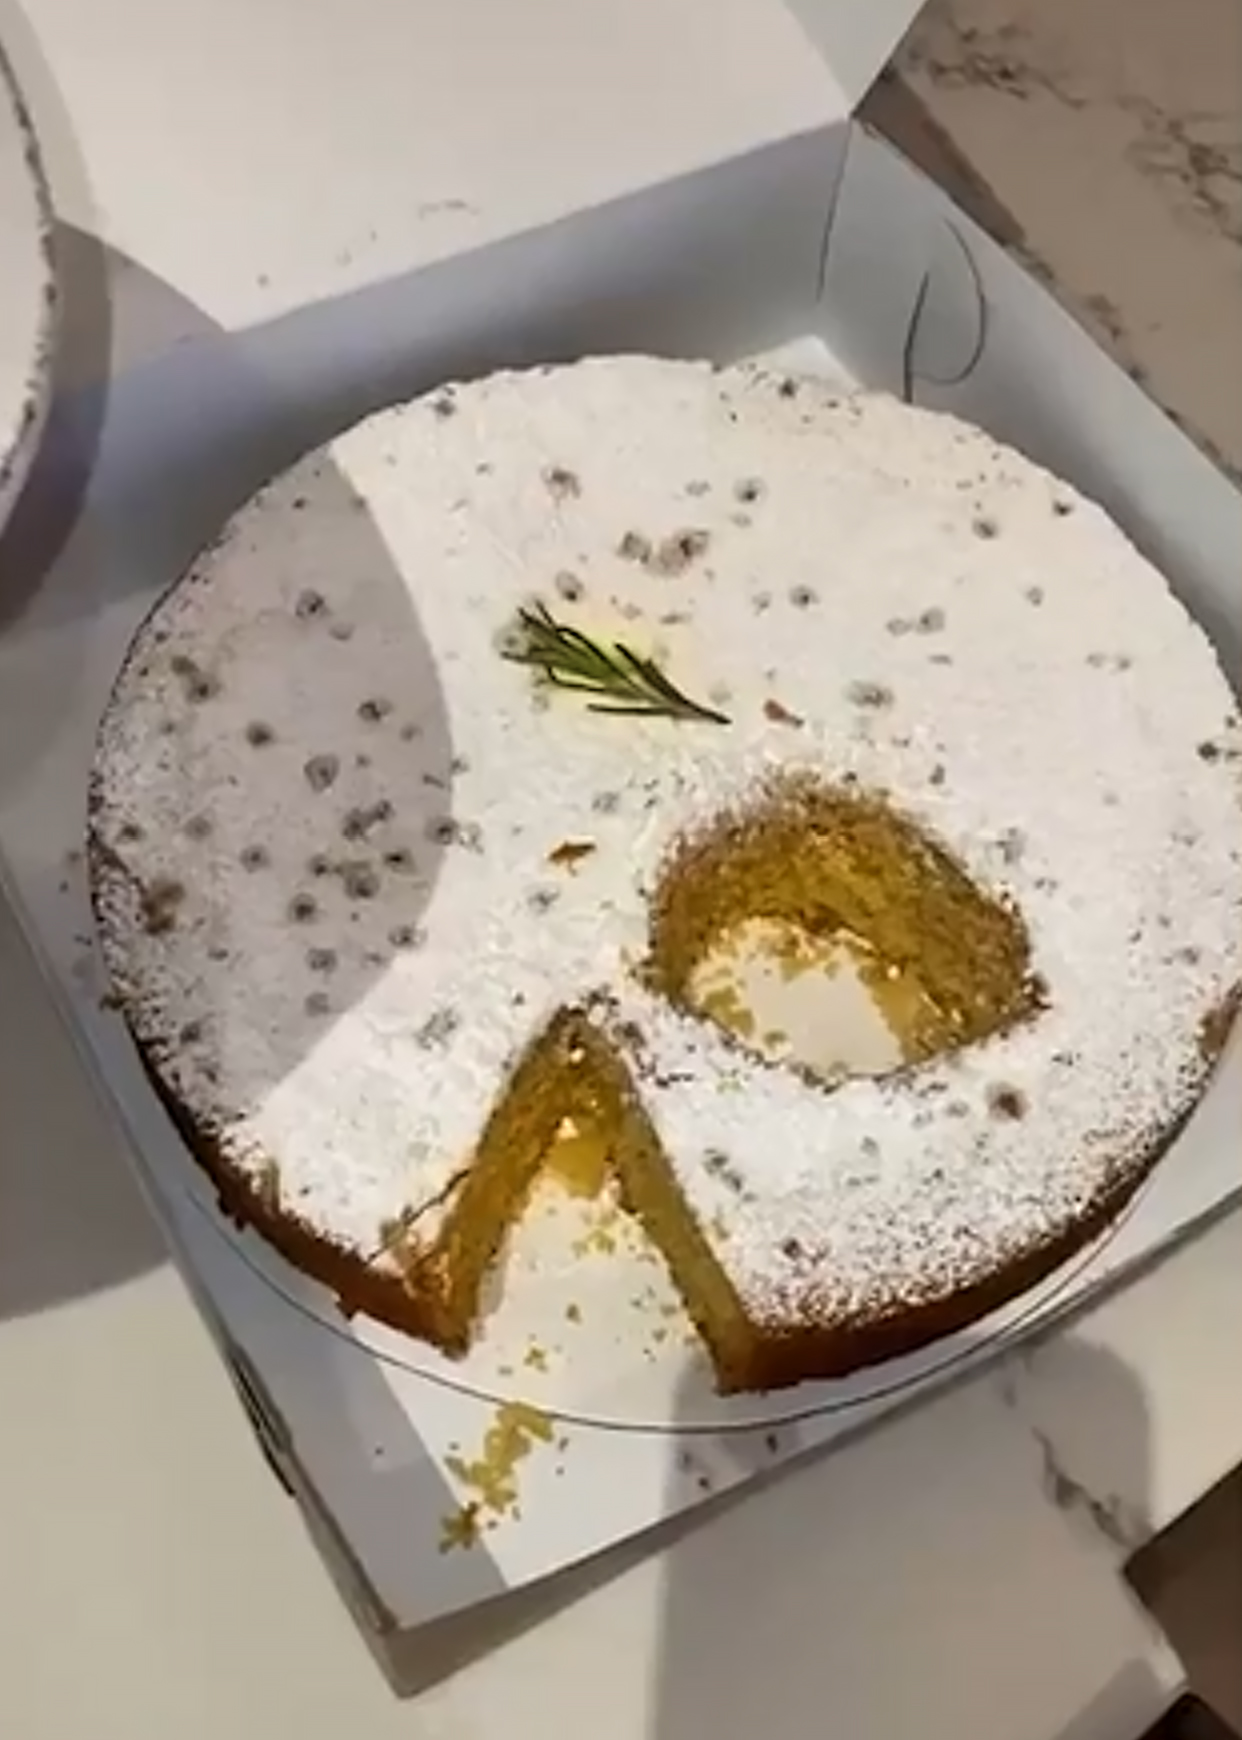 kylie jenner olive oil cake from instagram and tik tok